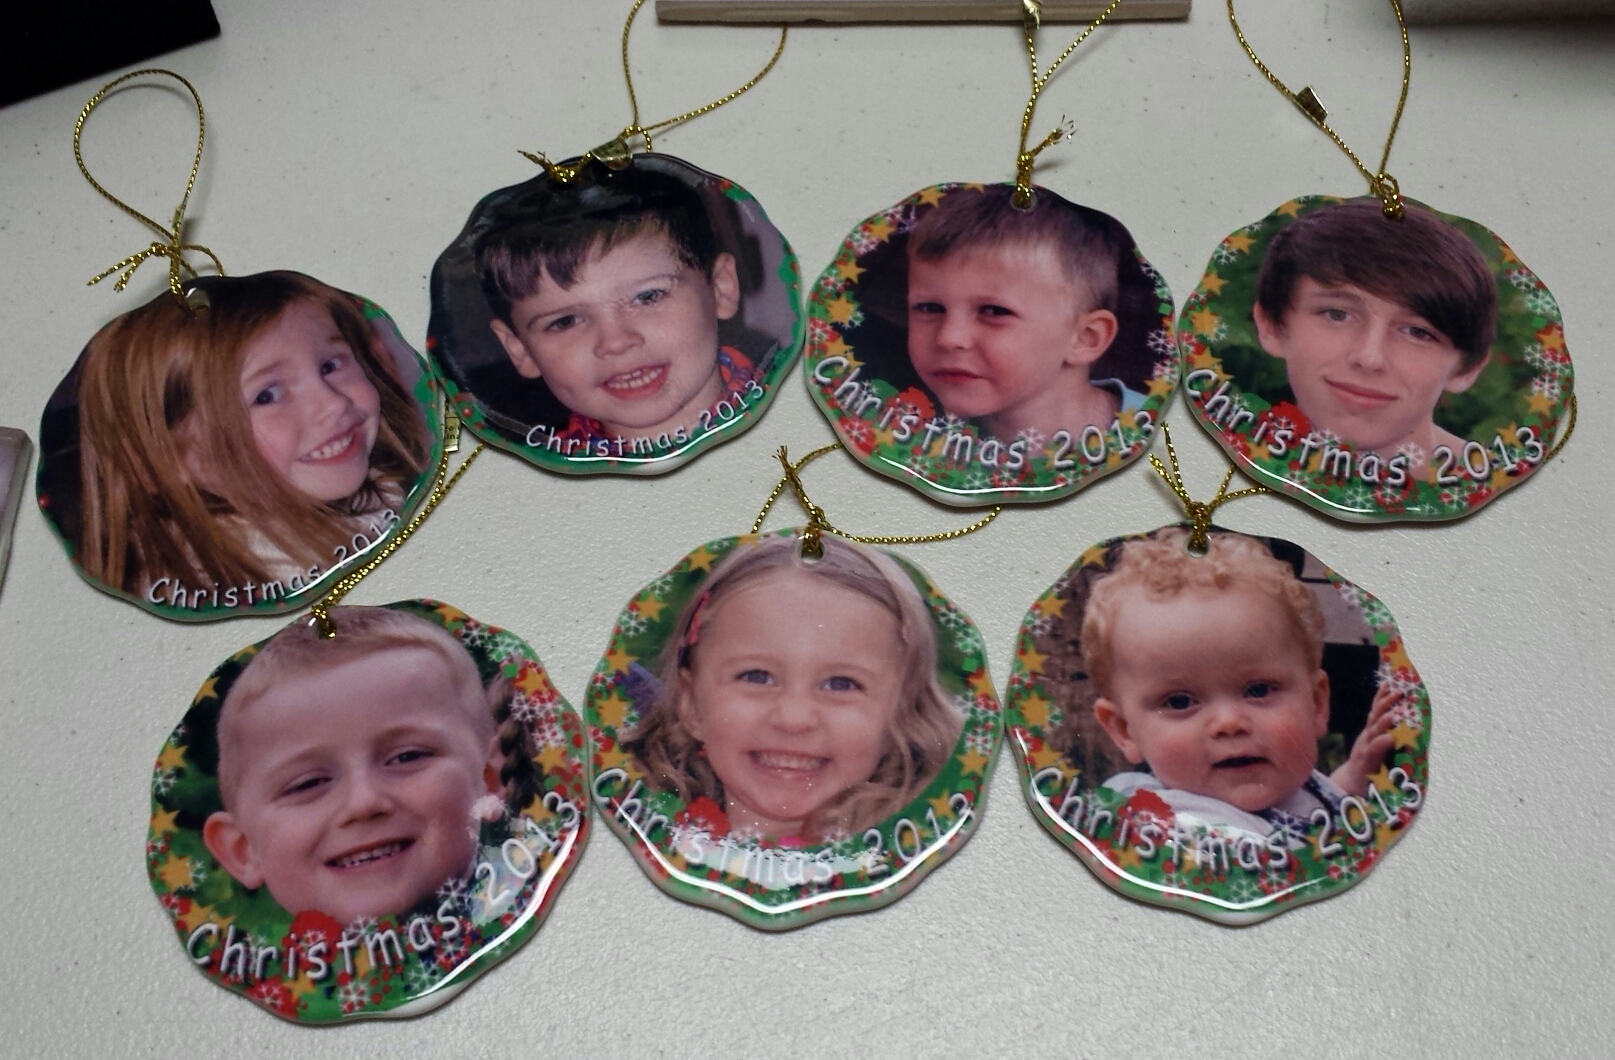 Christmas ornaments made with sublimation printing